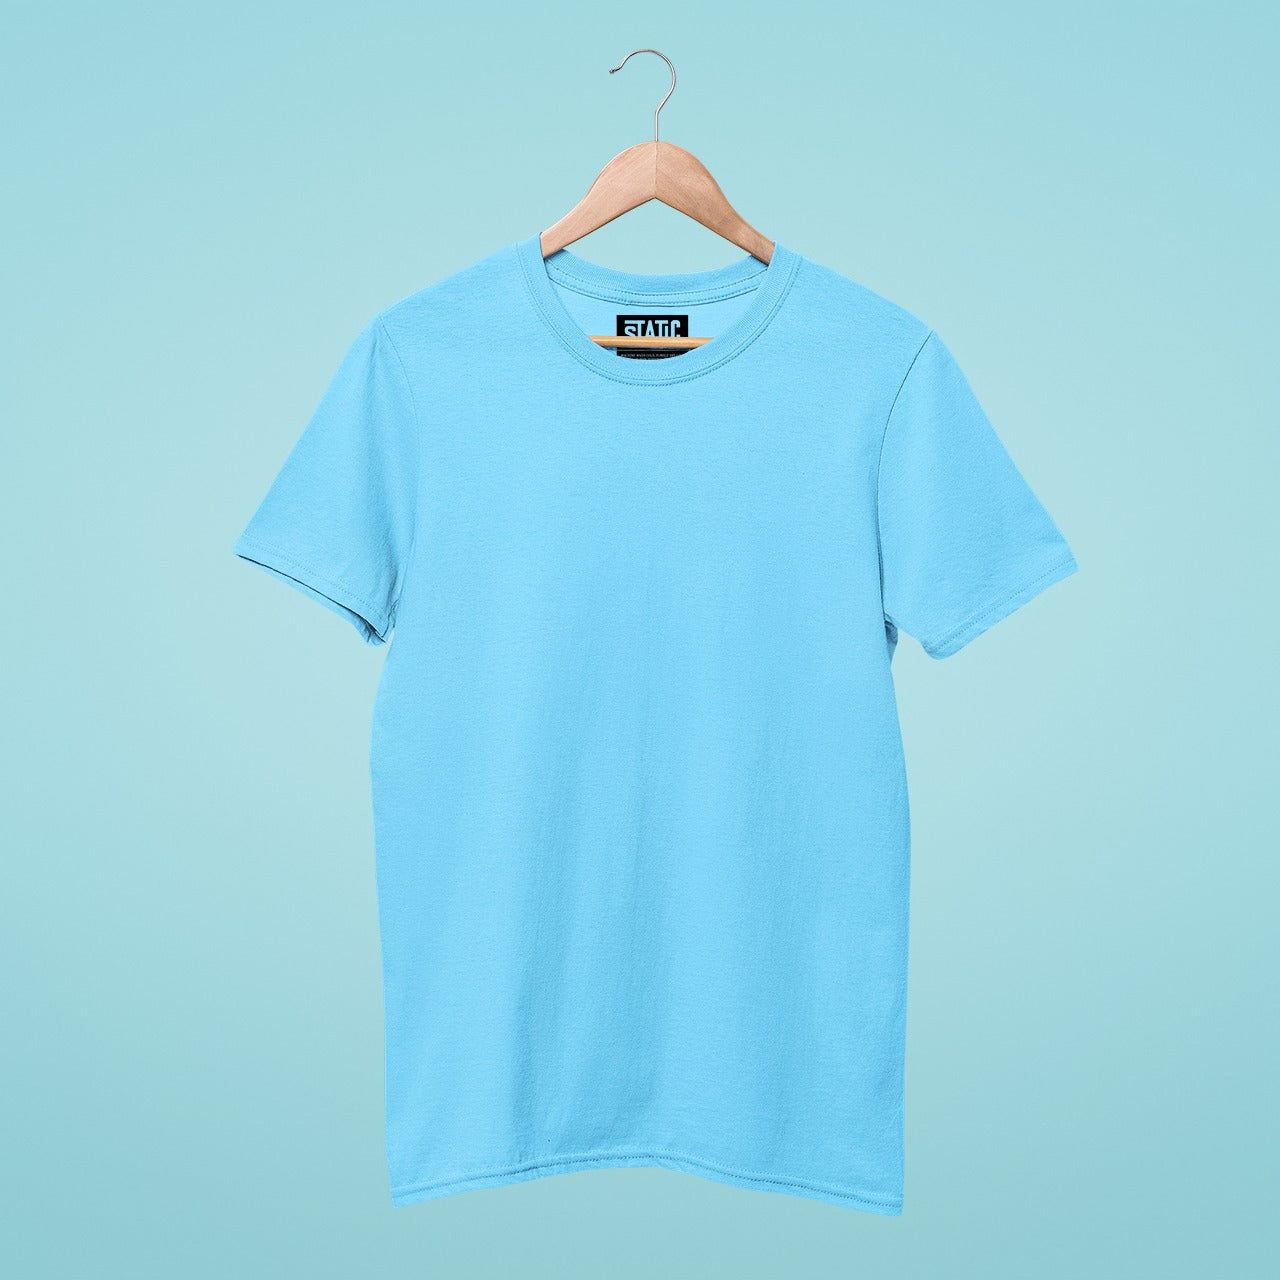 Our sky blue simple and basic round neck t-shirt is a soft and durable wardrobe staple, perfect for everyday wear. Its minimalist design with no graphics makes it a versatile piece that can be paired with any bottom, adding a touch of sophistication to your outfit. Available in various sizes, it's perfect for those who love simplicity and elegance in their clothing. Add a touch of refinement to your style today.